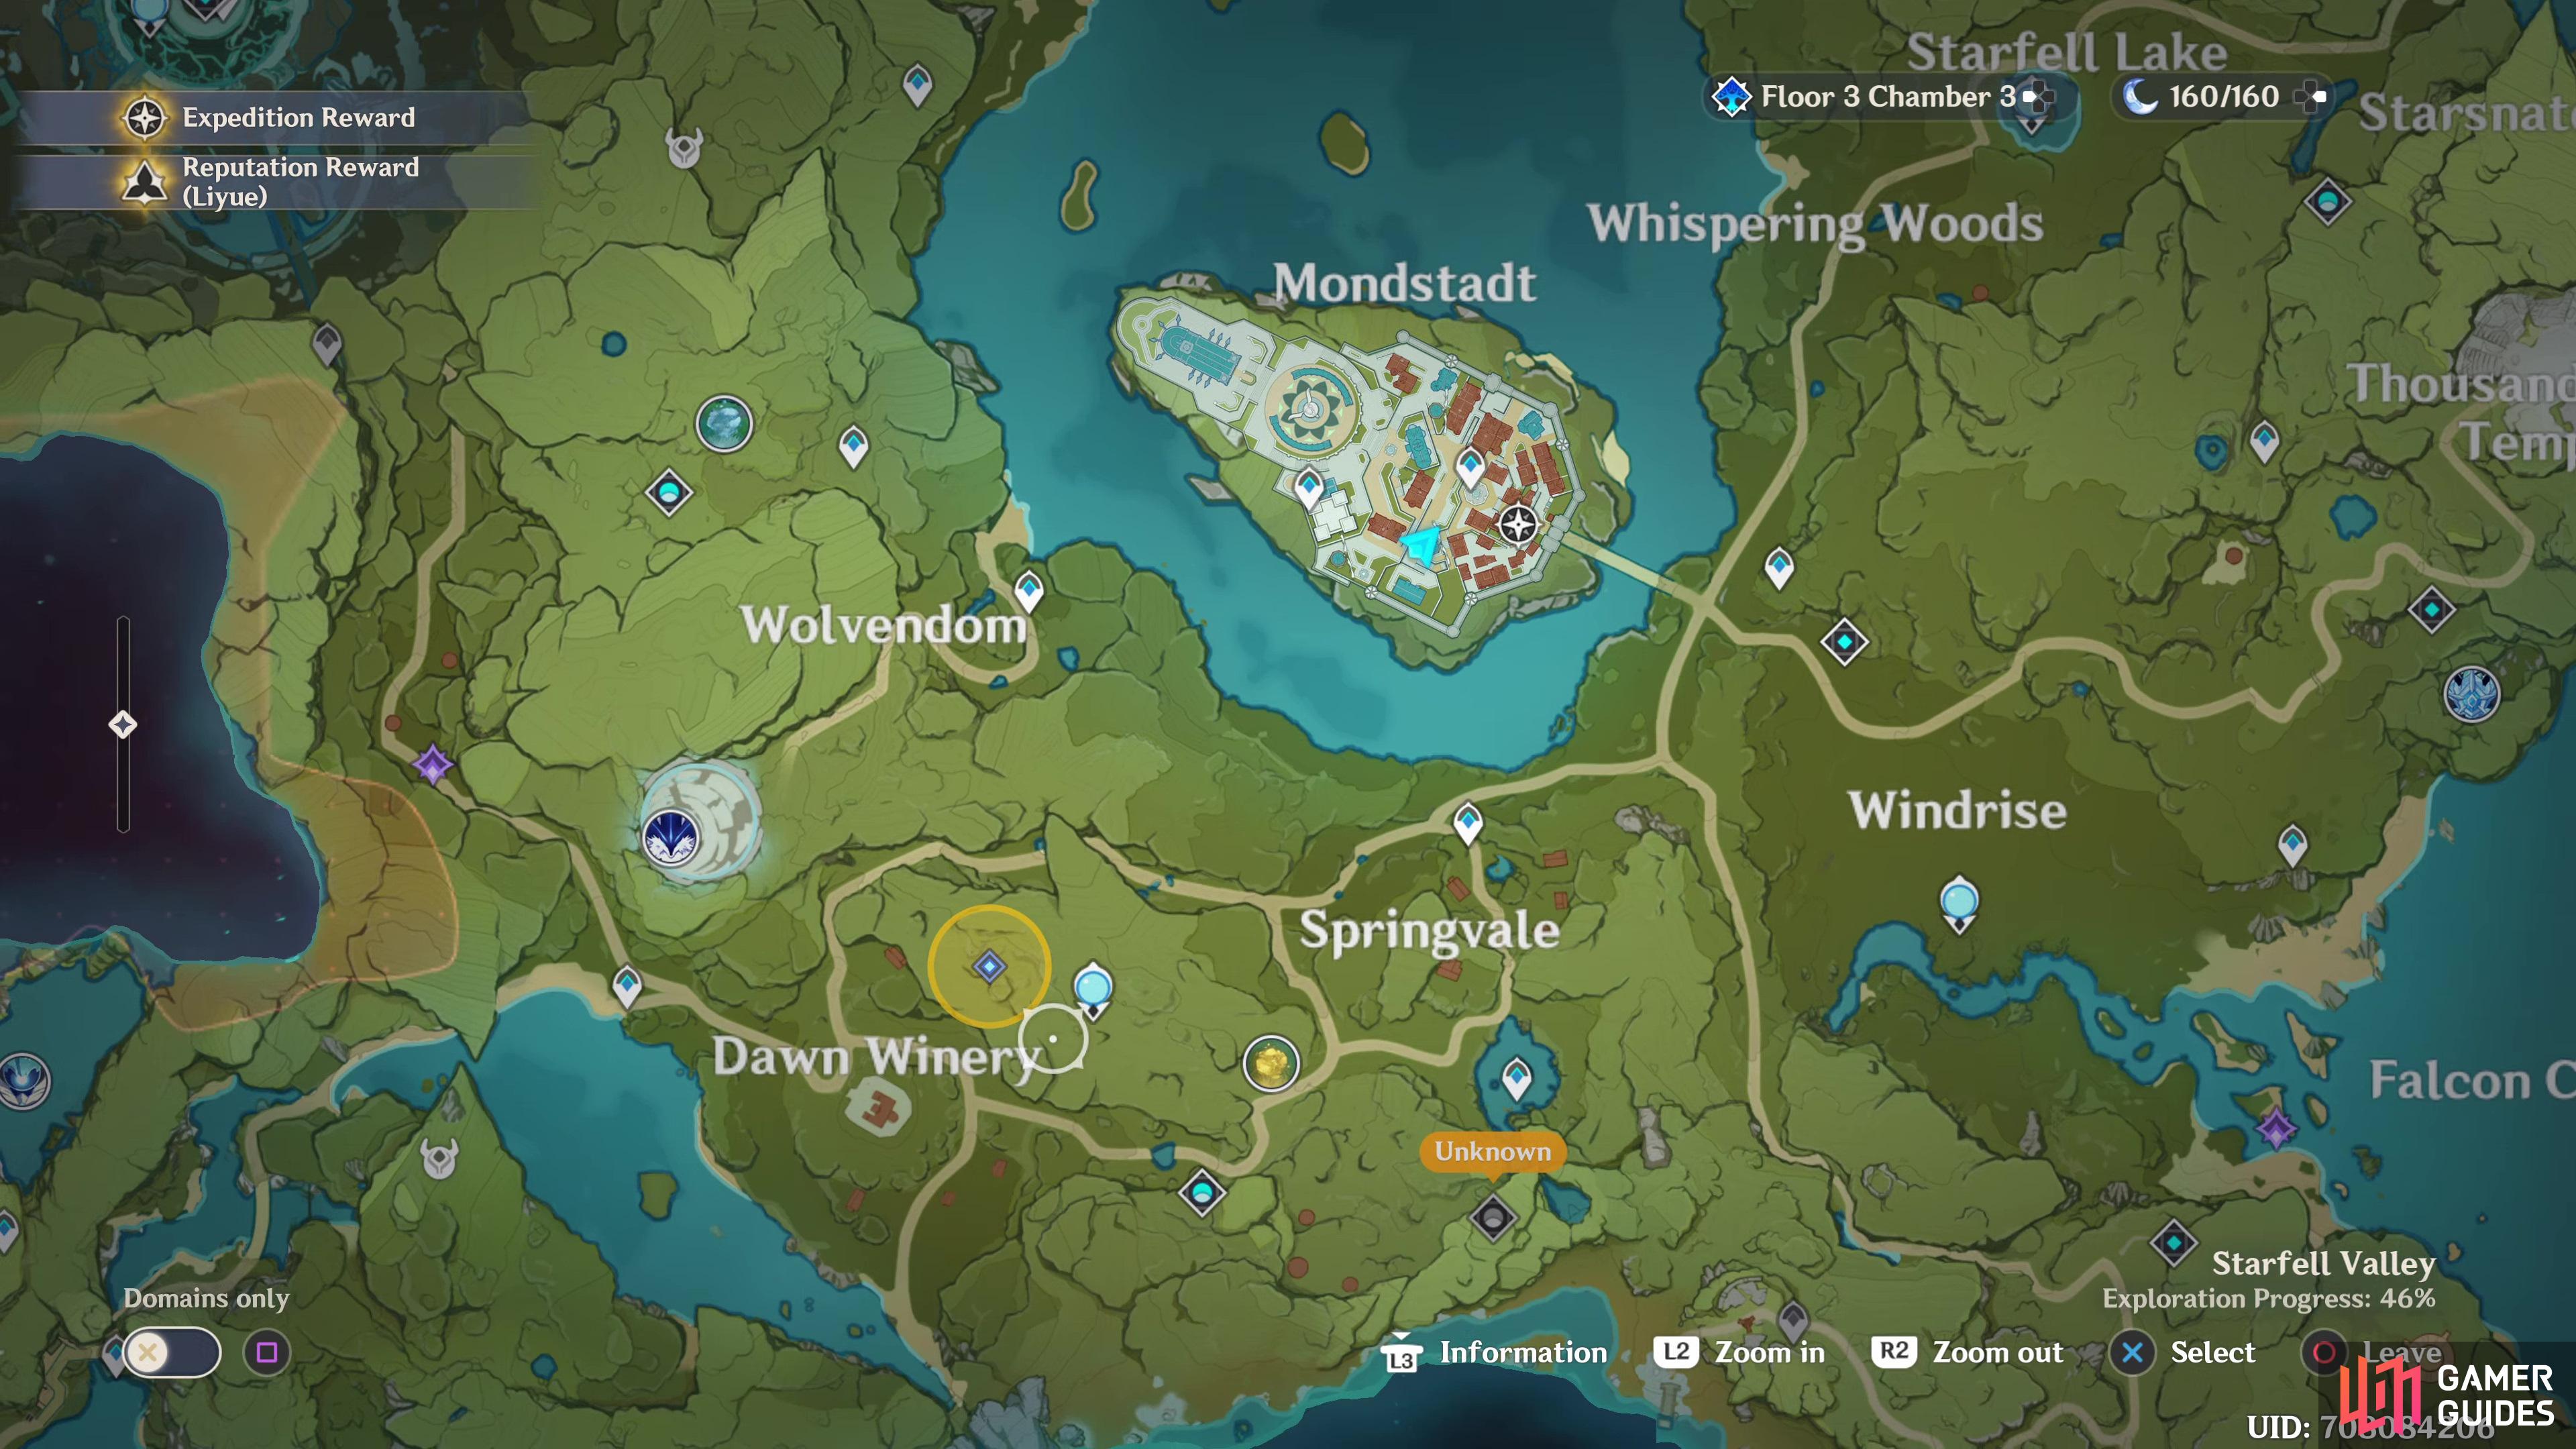 Head to the two orange circles on the map